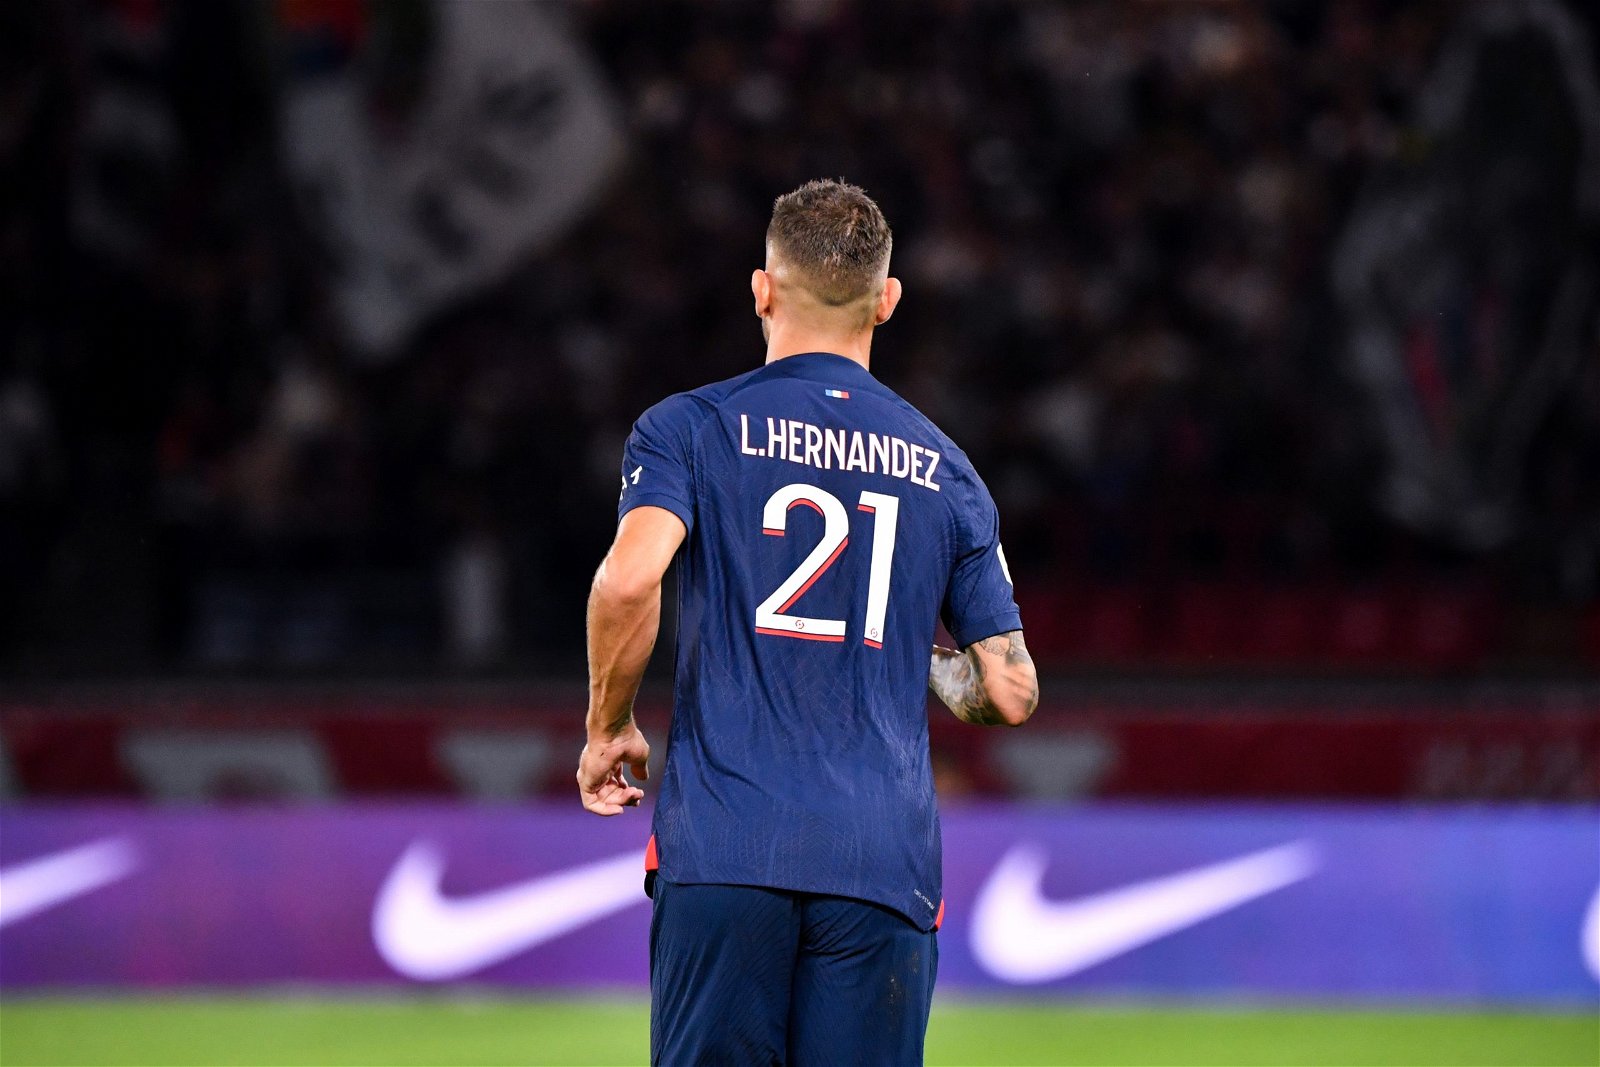 Lucas Hernandez is the third highest paid player in the French Ligue 1